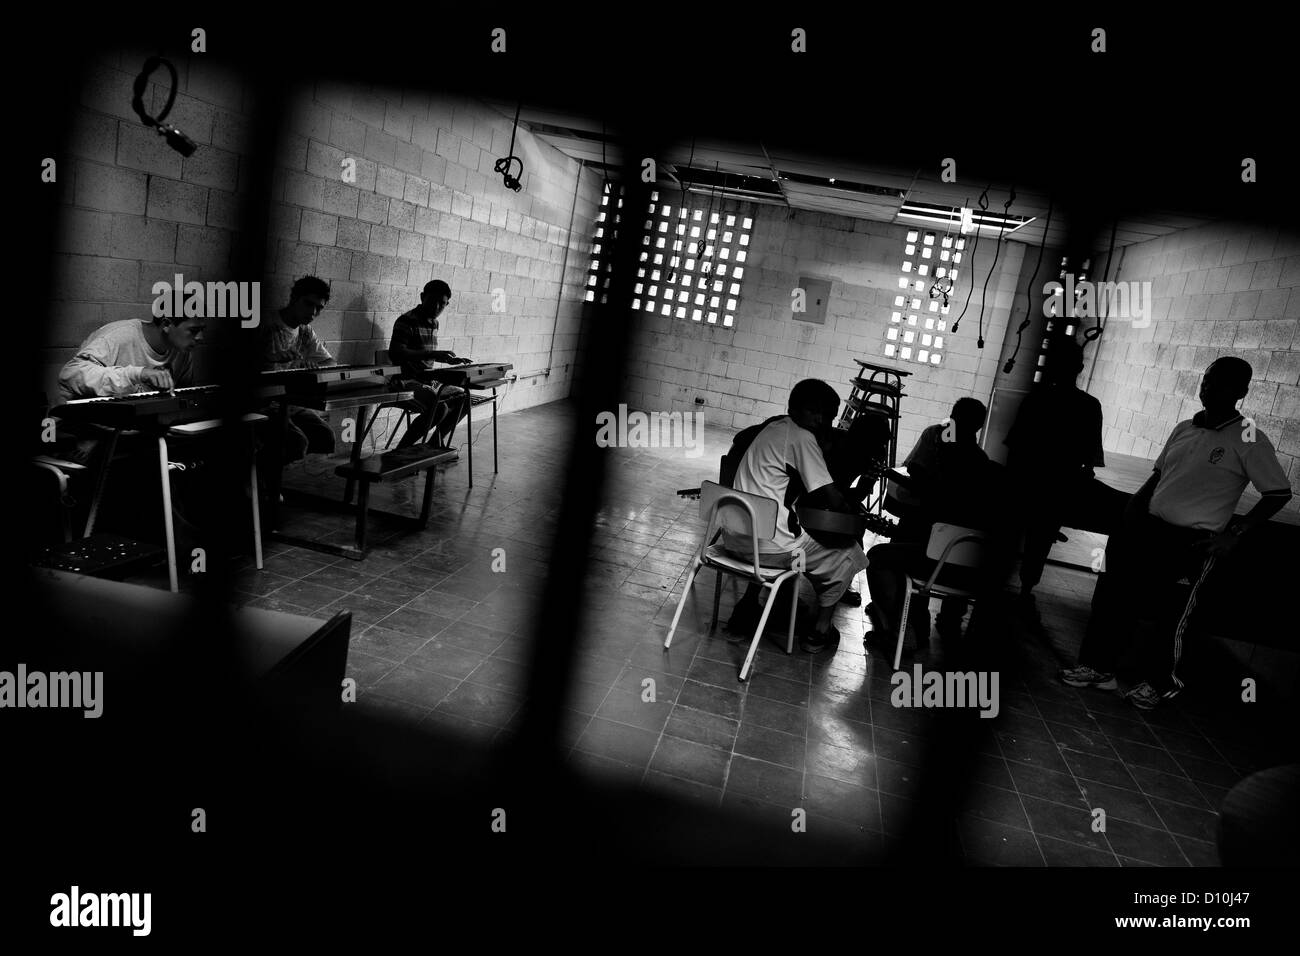 Members of the Mara Salvatrucha gang (MS-13) play music during the resocialization classes in the prison in El Salvador. Stock Photo